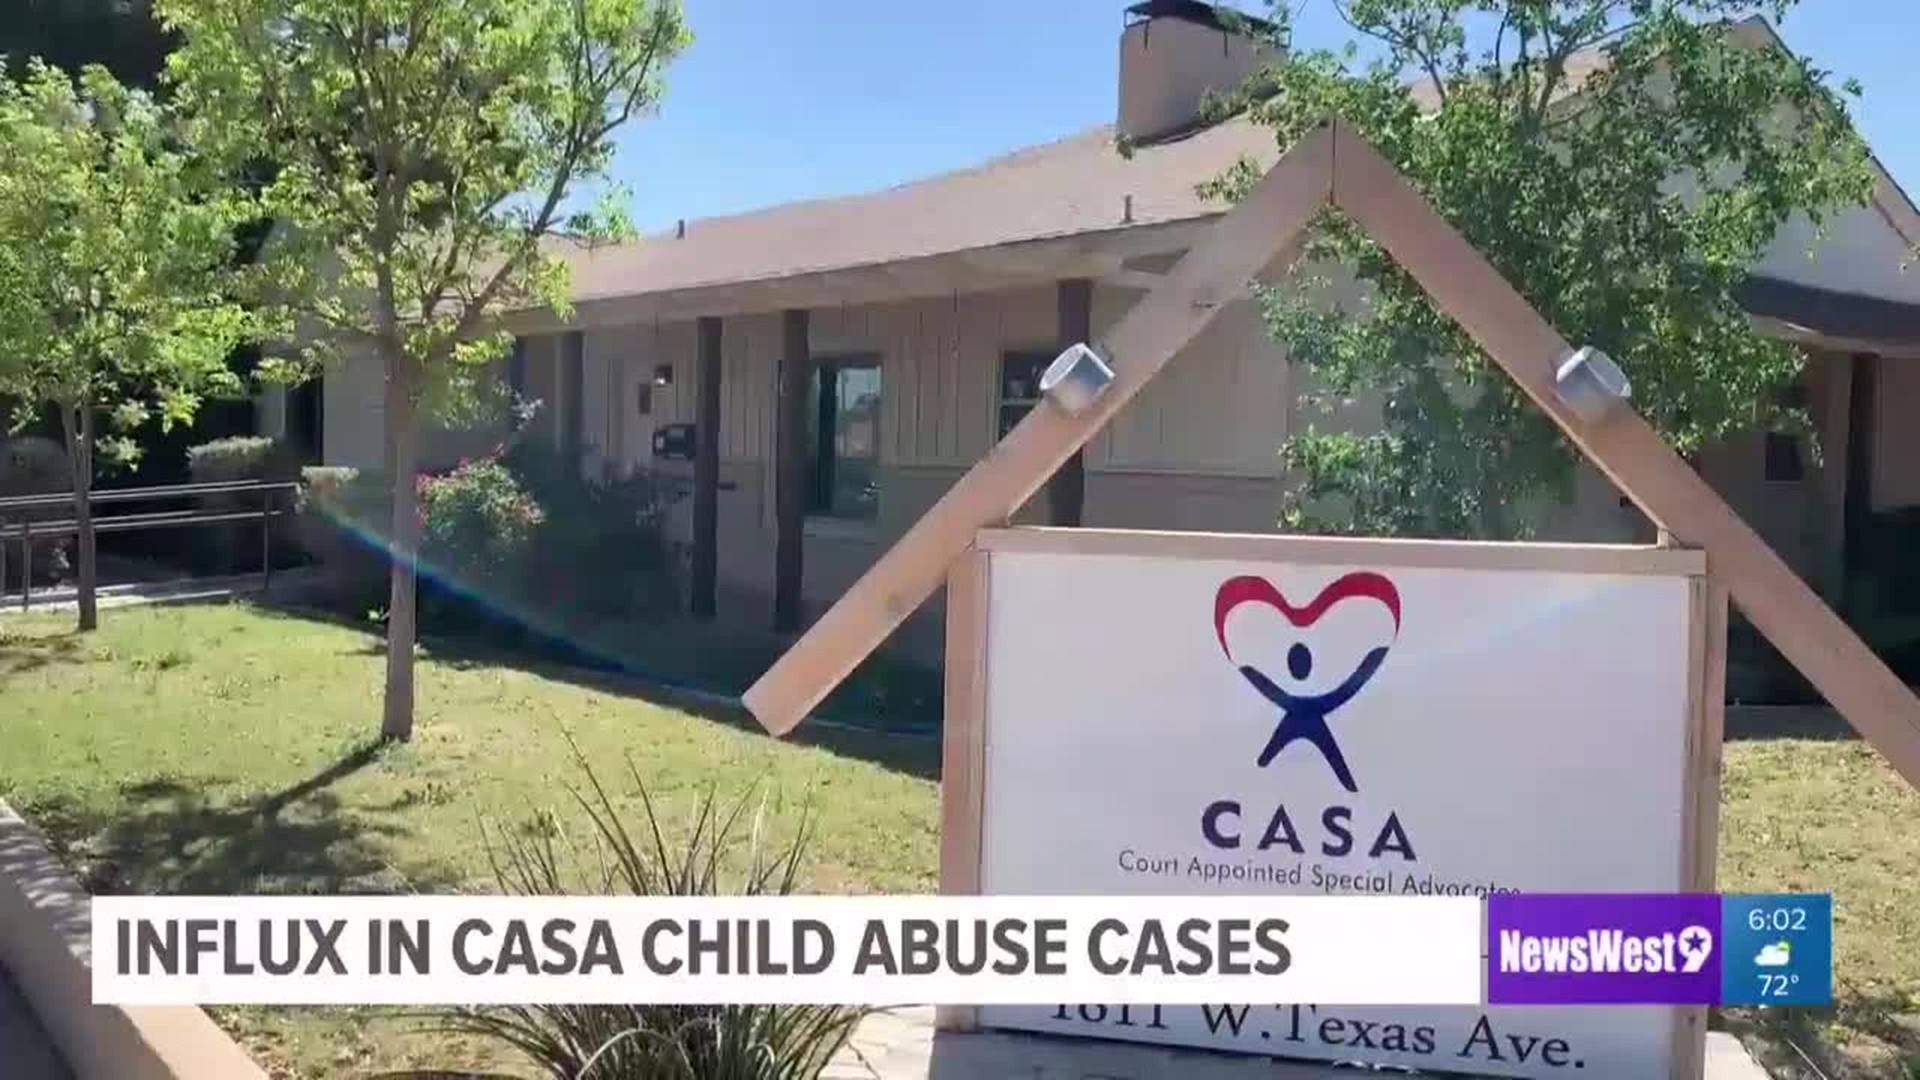 CASA of West Texas reports extreme influx in child abuse cases